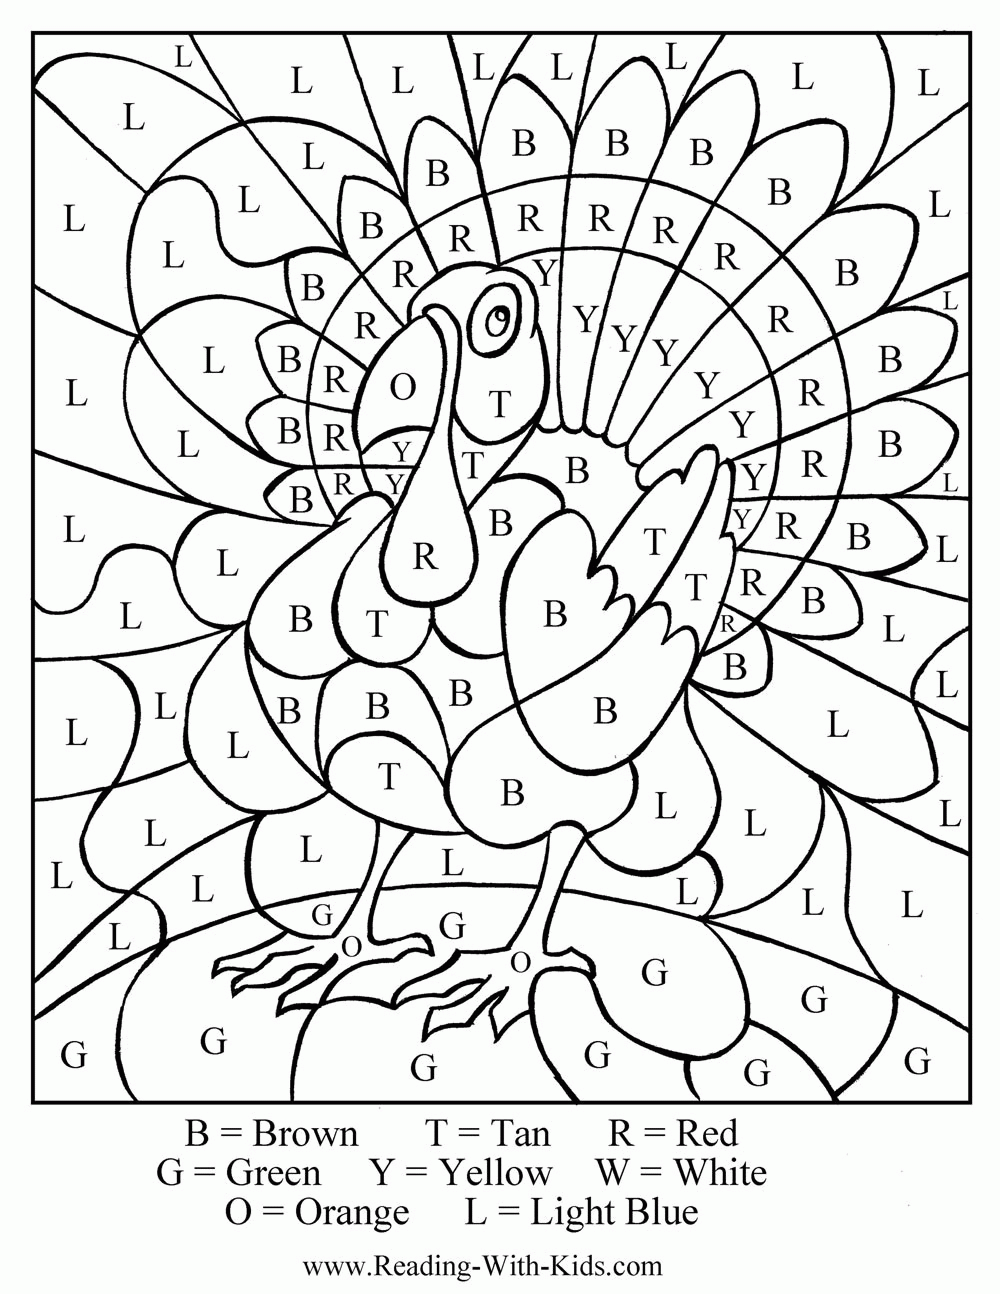 Free Printable November Coloring Pages   High Quality Coloring ...